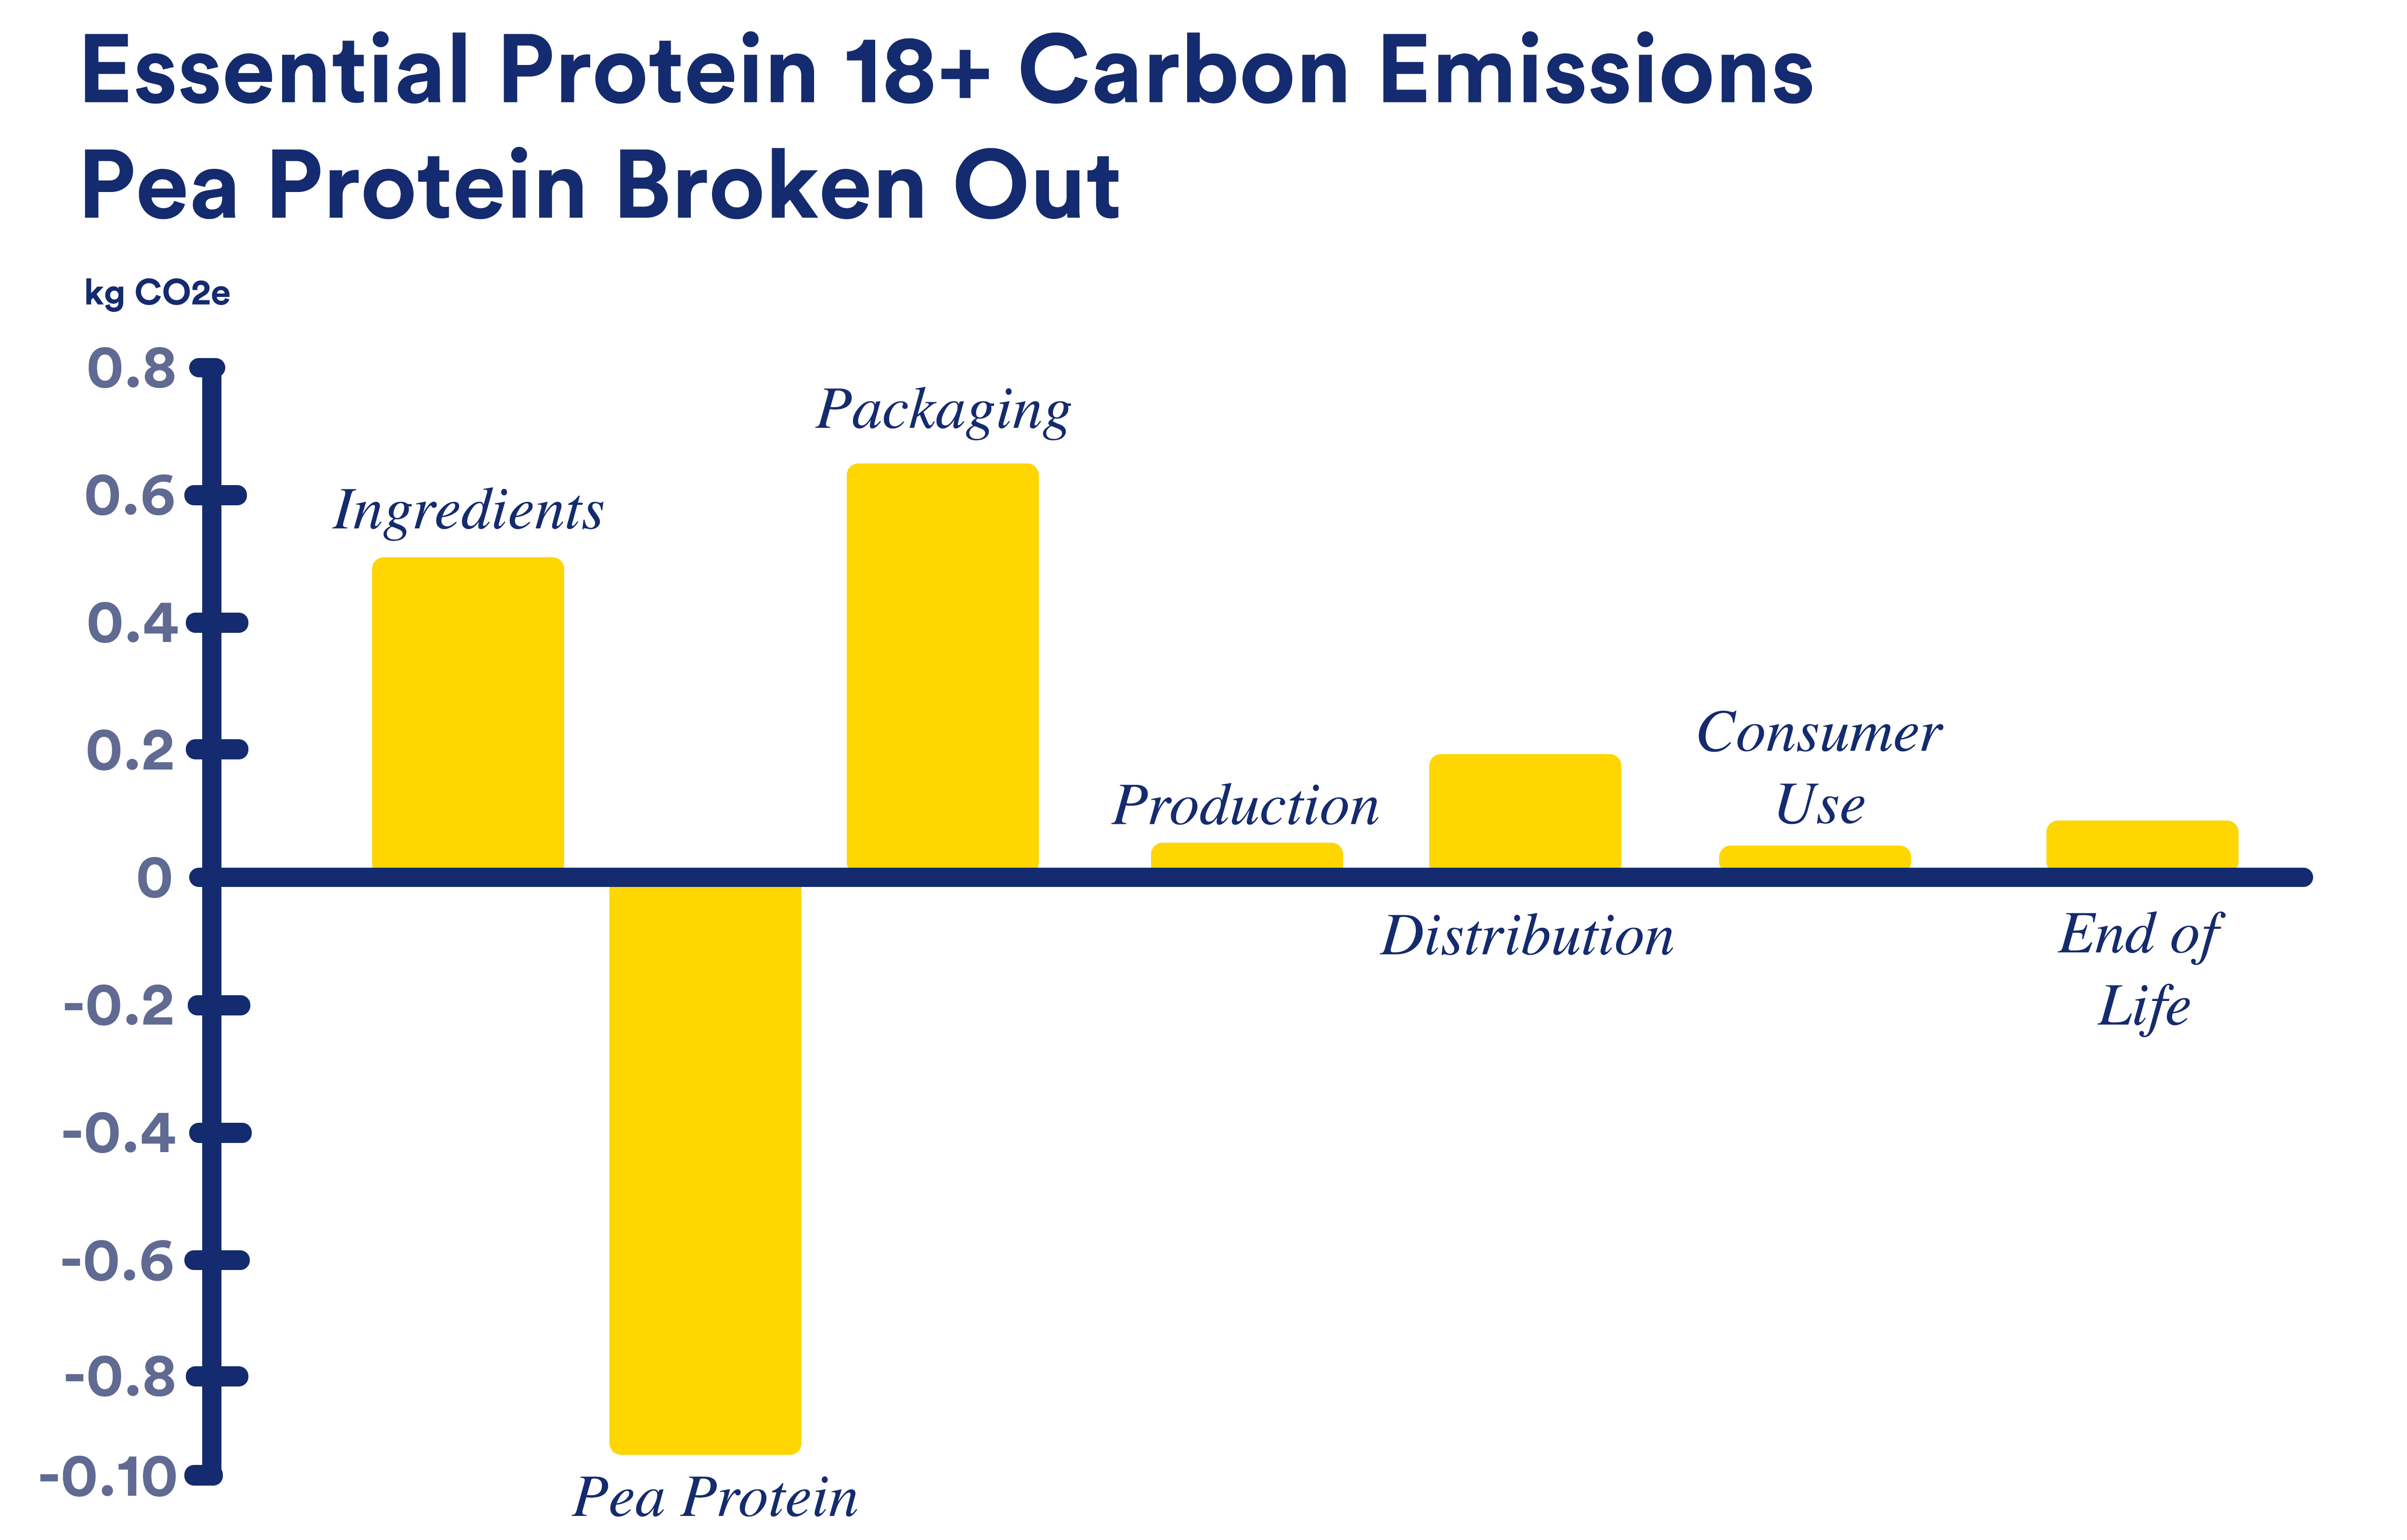 Essential Protein Carbon with Pea Protein Broken Out